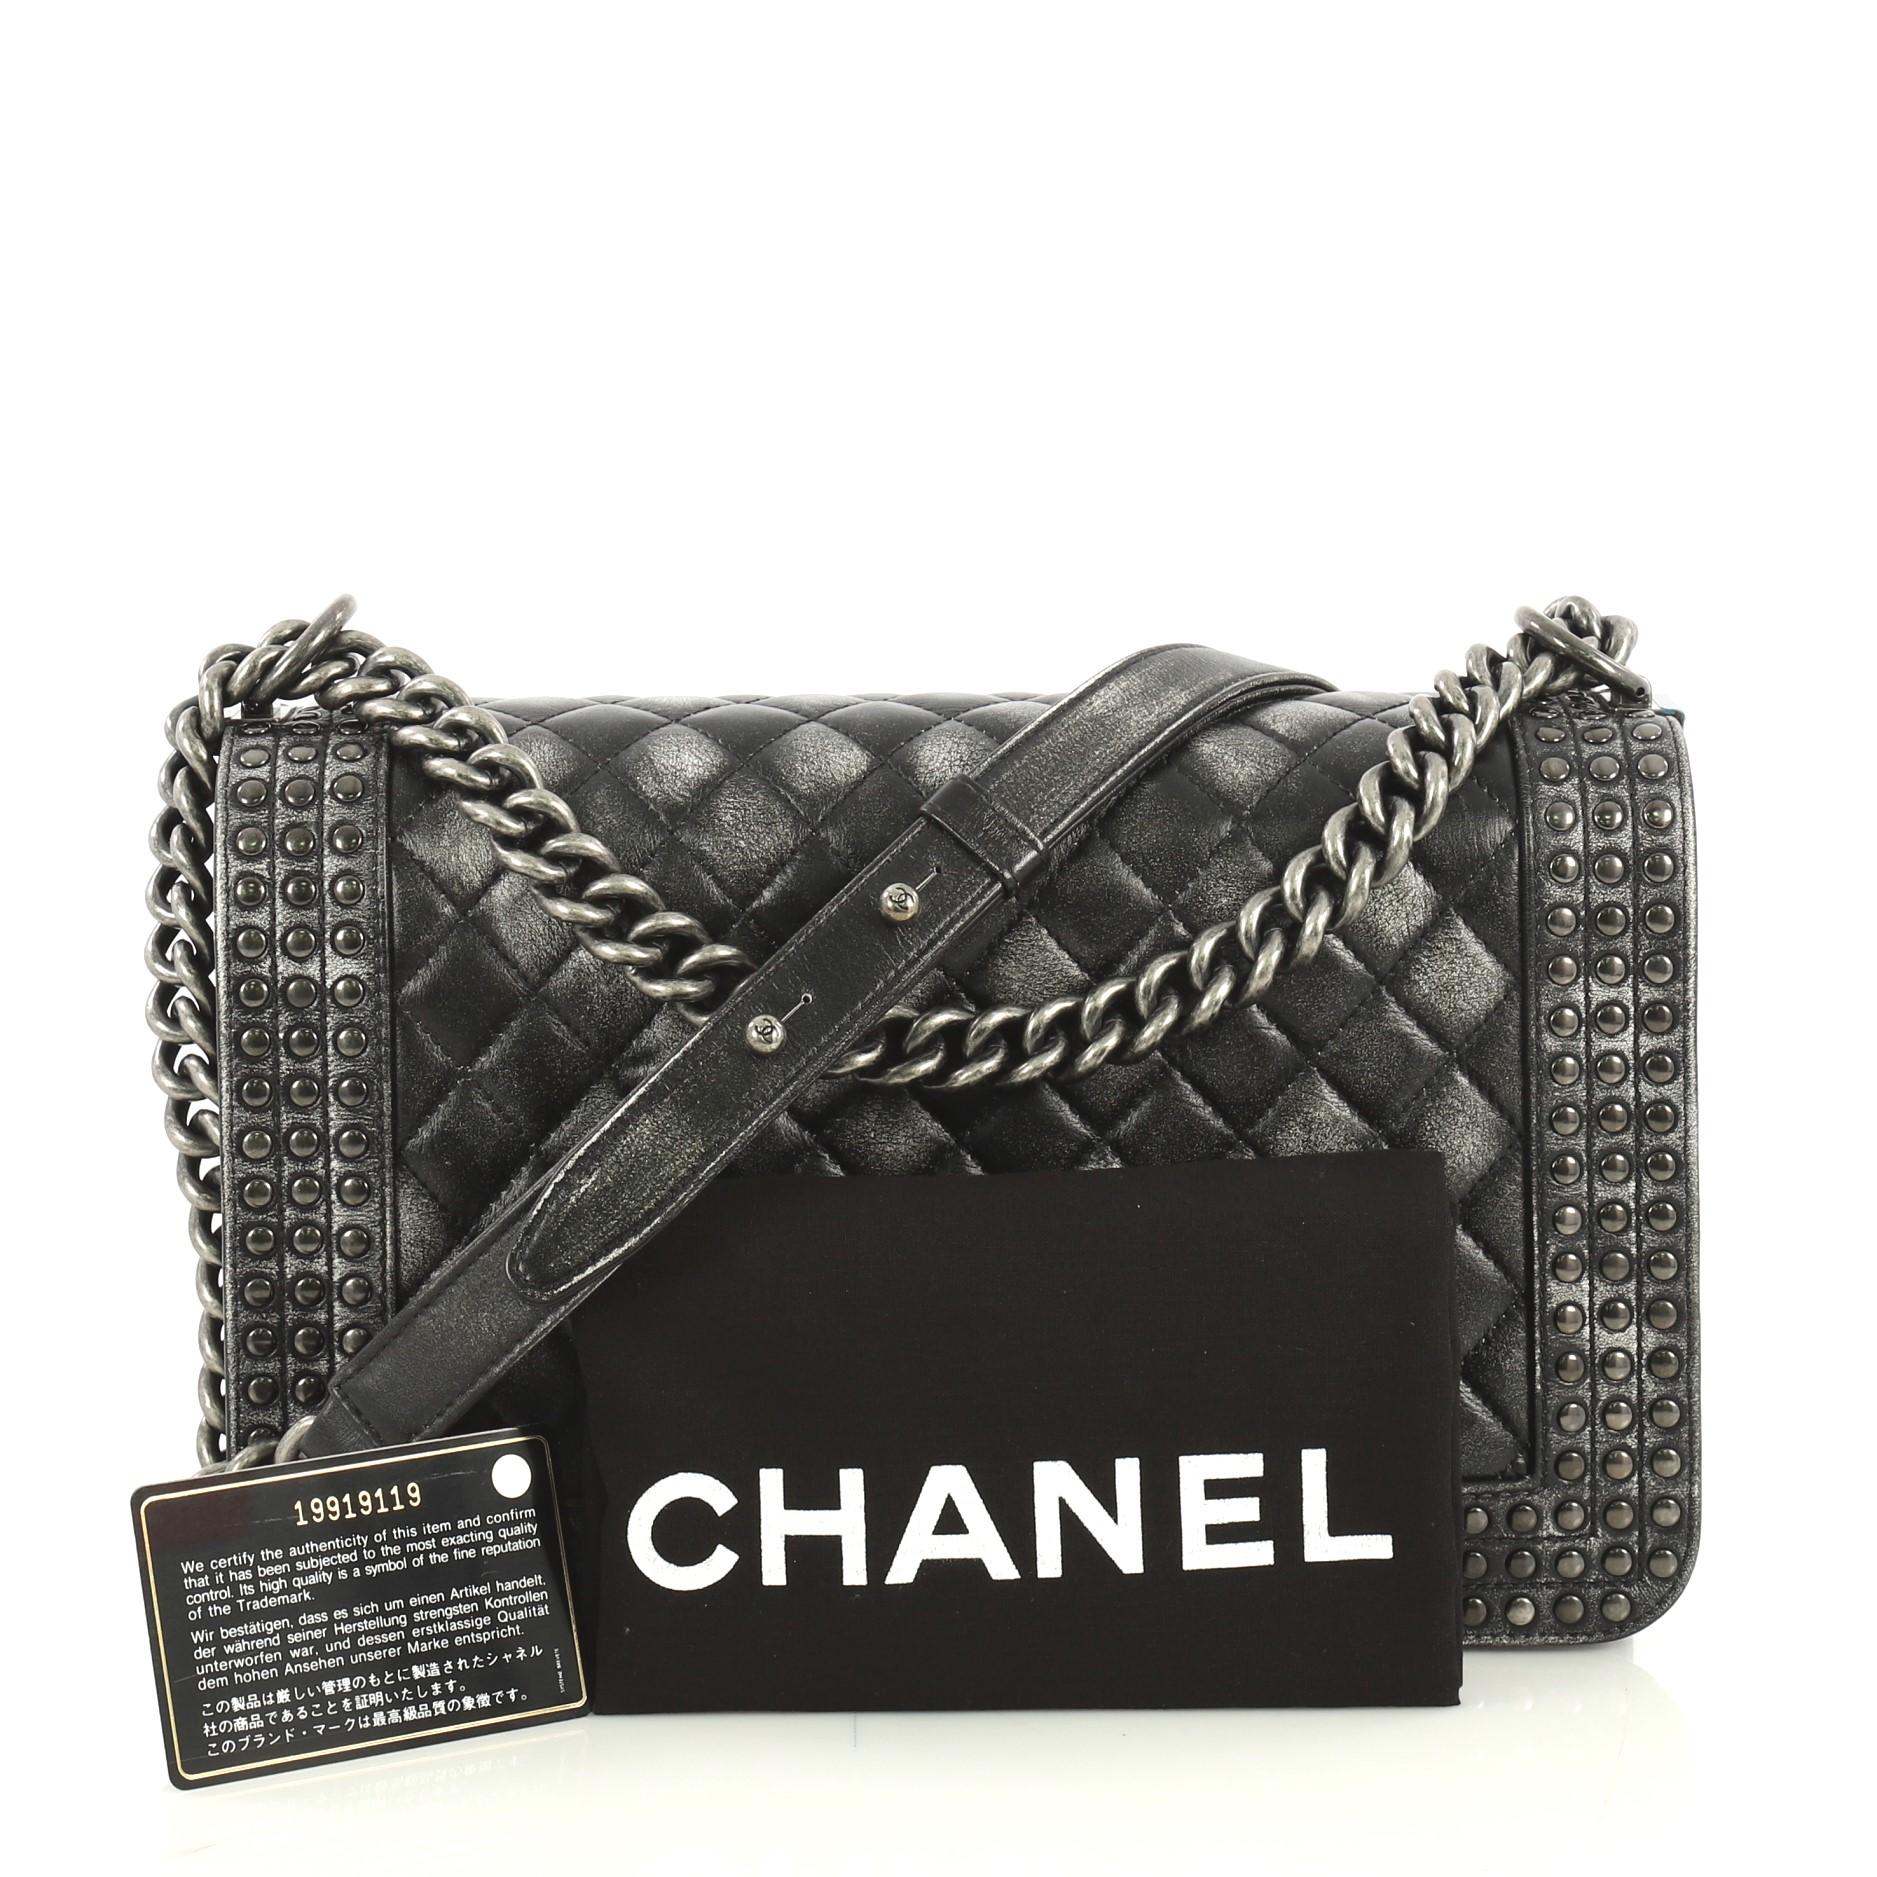 This Chanel Paris-Dallas Boy Flap Bag Quilted Studded Distressed Calfskin New Medium, crafted from black and gray studded distressed calfskin, features chain link strap with shoulder pad, studs detailing, and aged silver-tone hardware. Its CC Boy